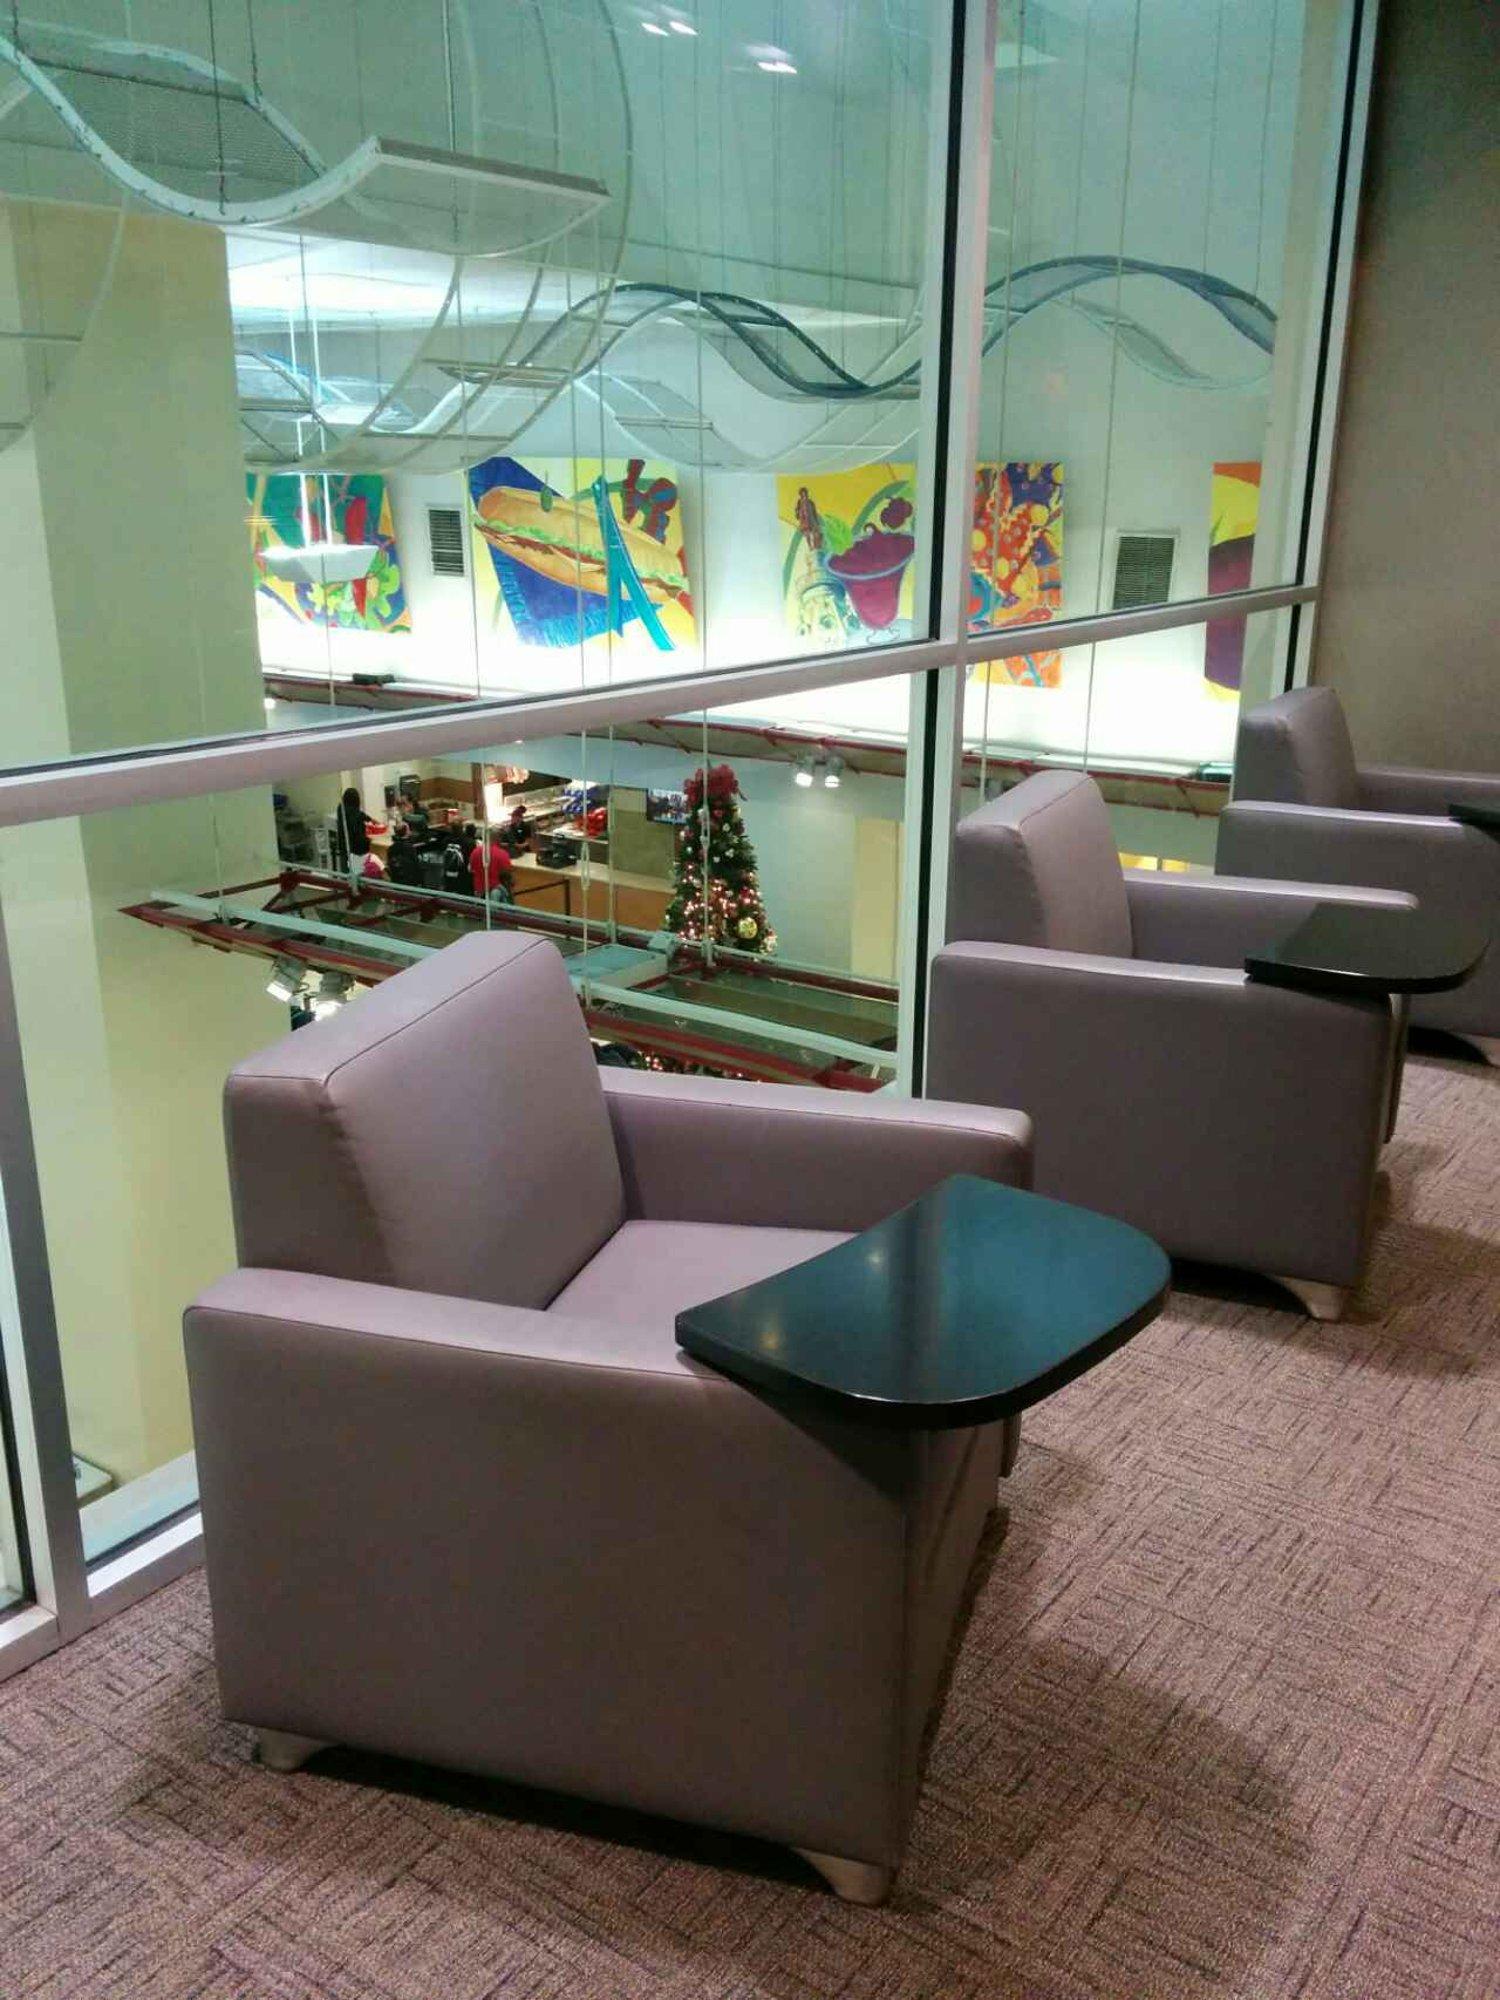 American Airlines Admirals Club image 8 of 48